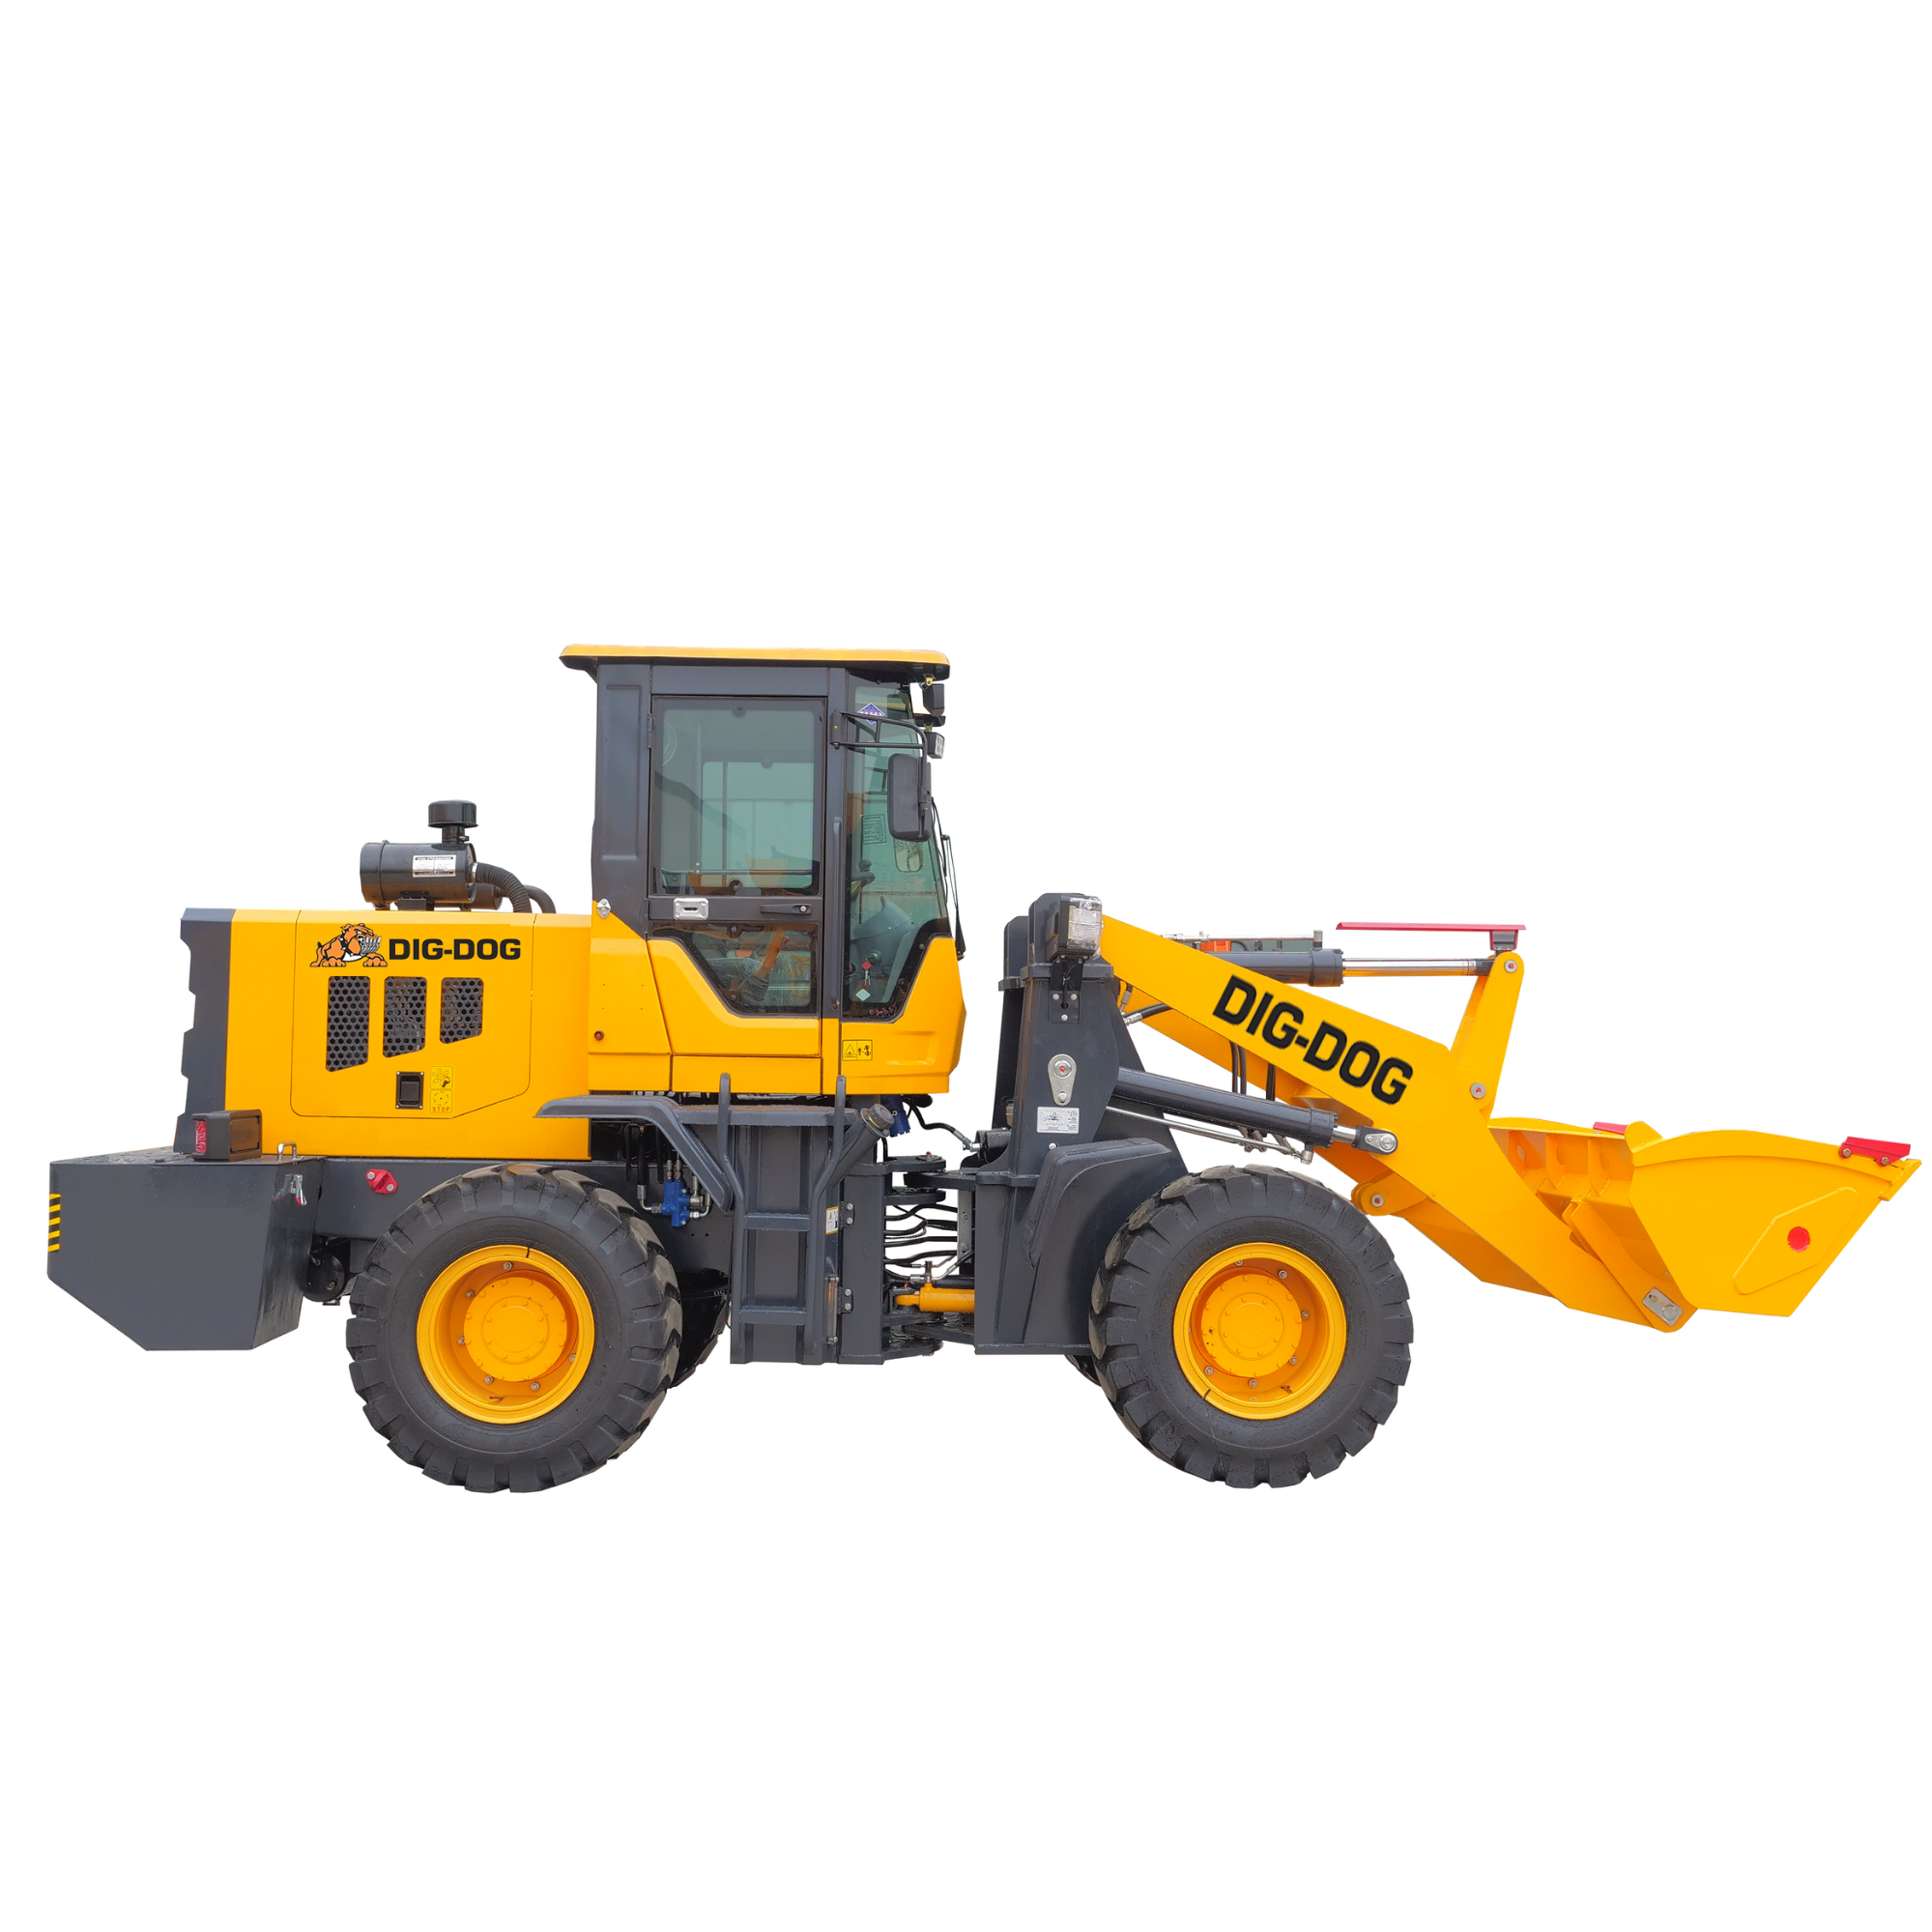 DIG-DOG launches its new quality Compact Wheel Loader